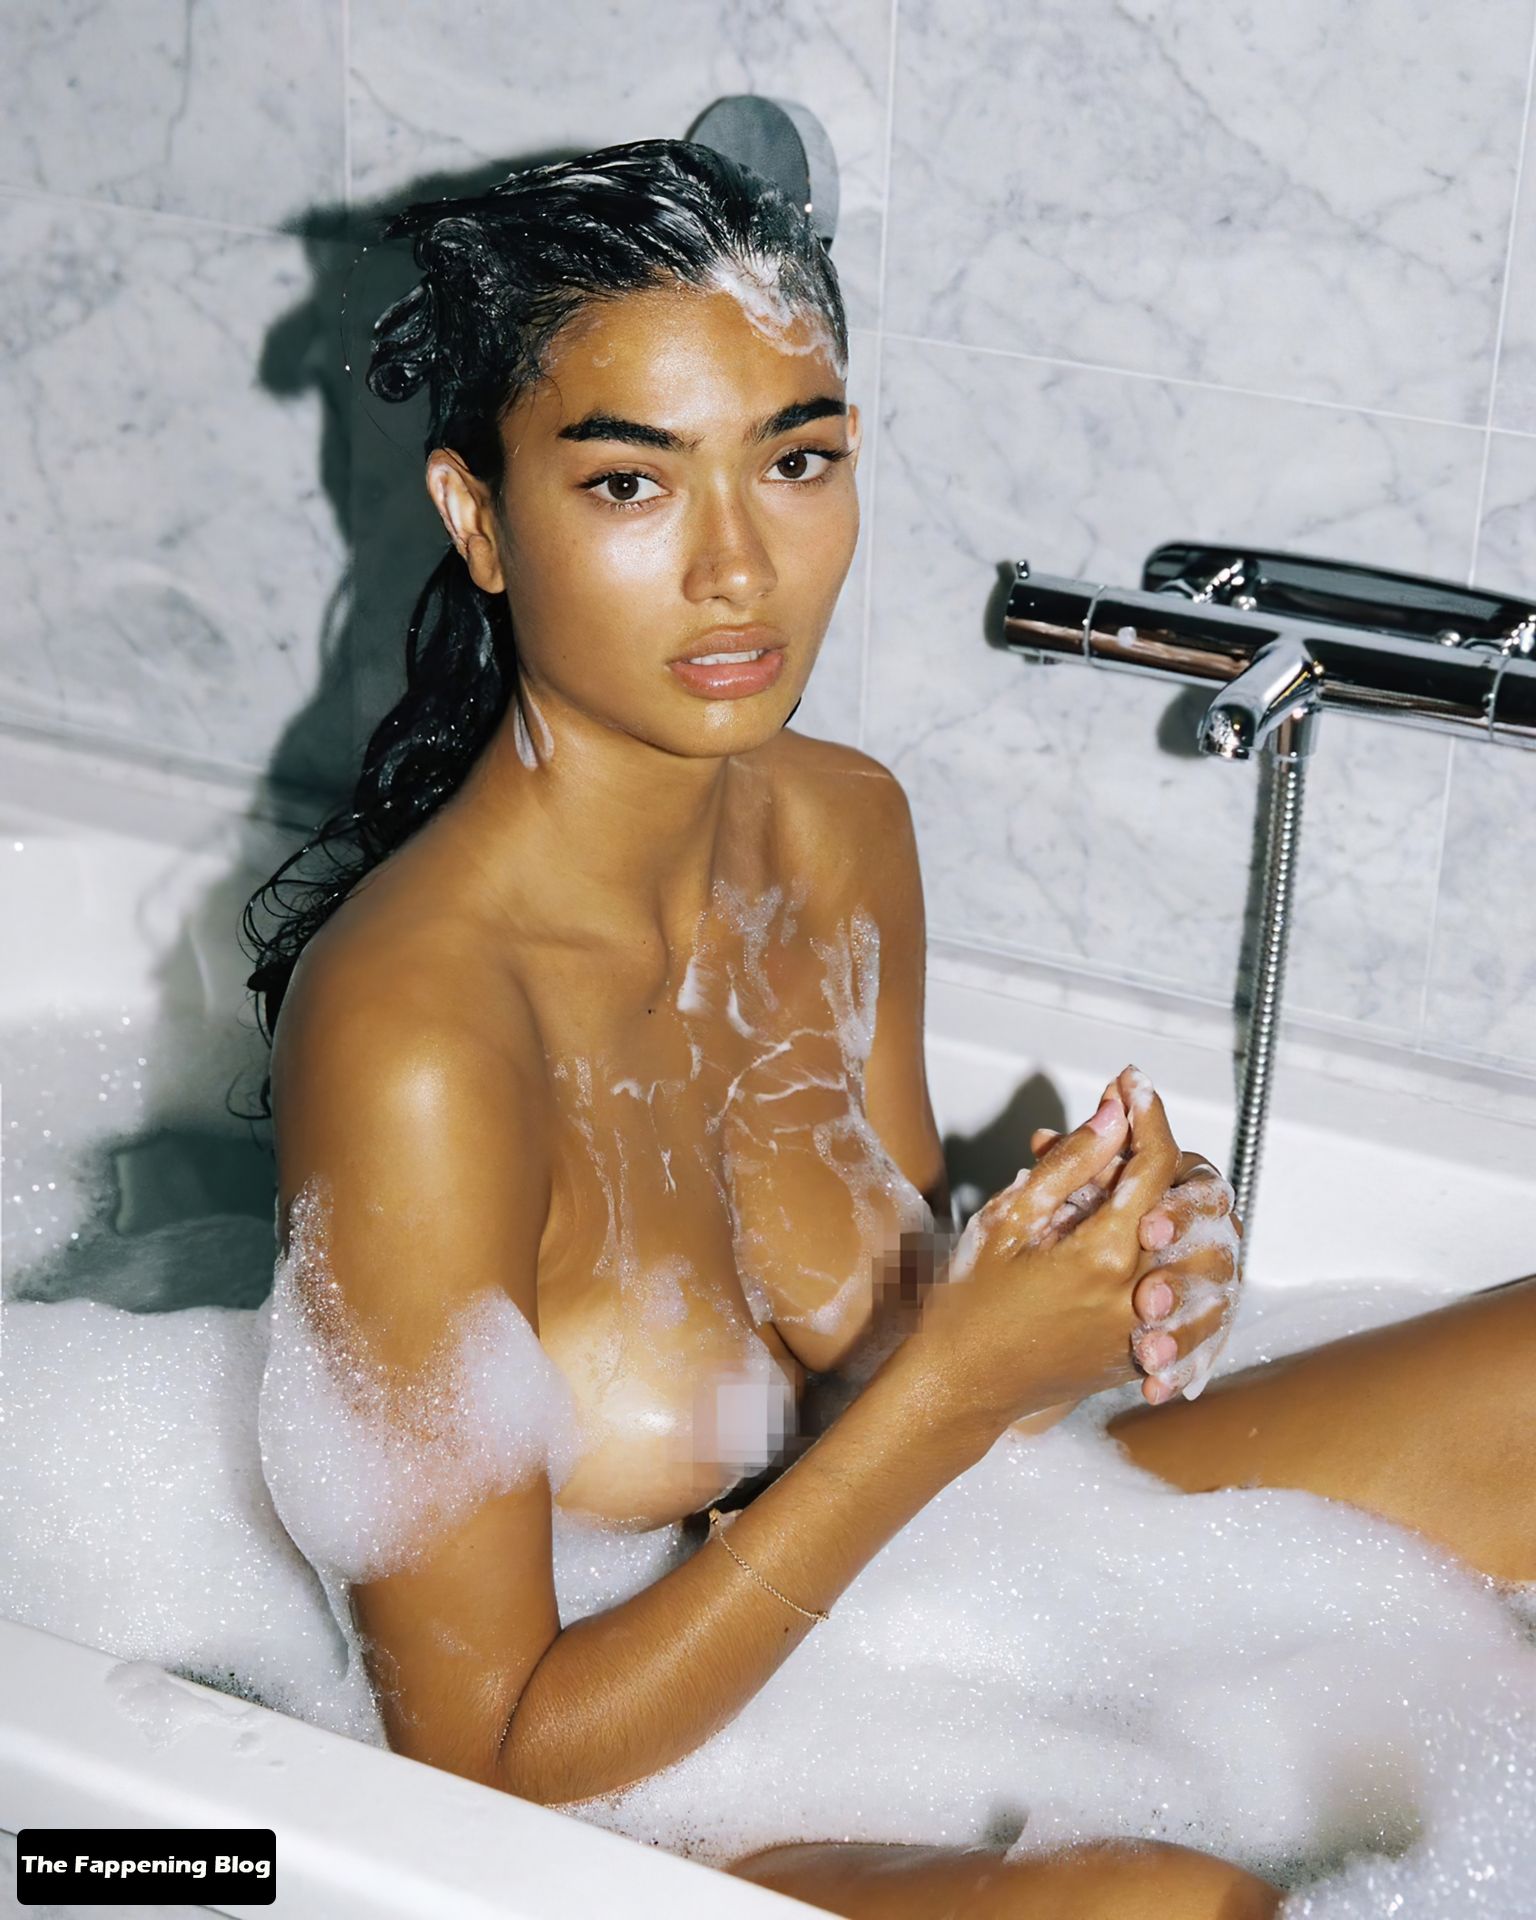 Kelly-Gale-Topless-1-1-thefappeningblog.com_.jpg